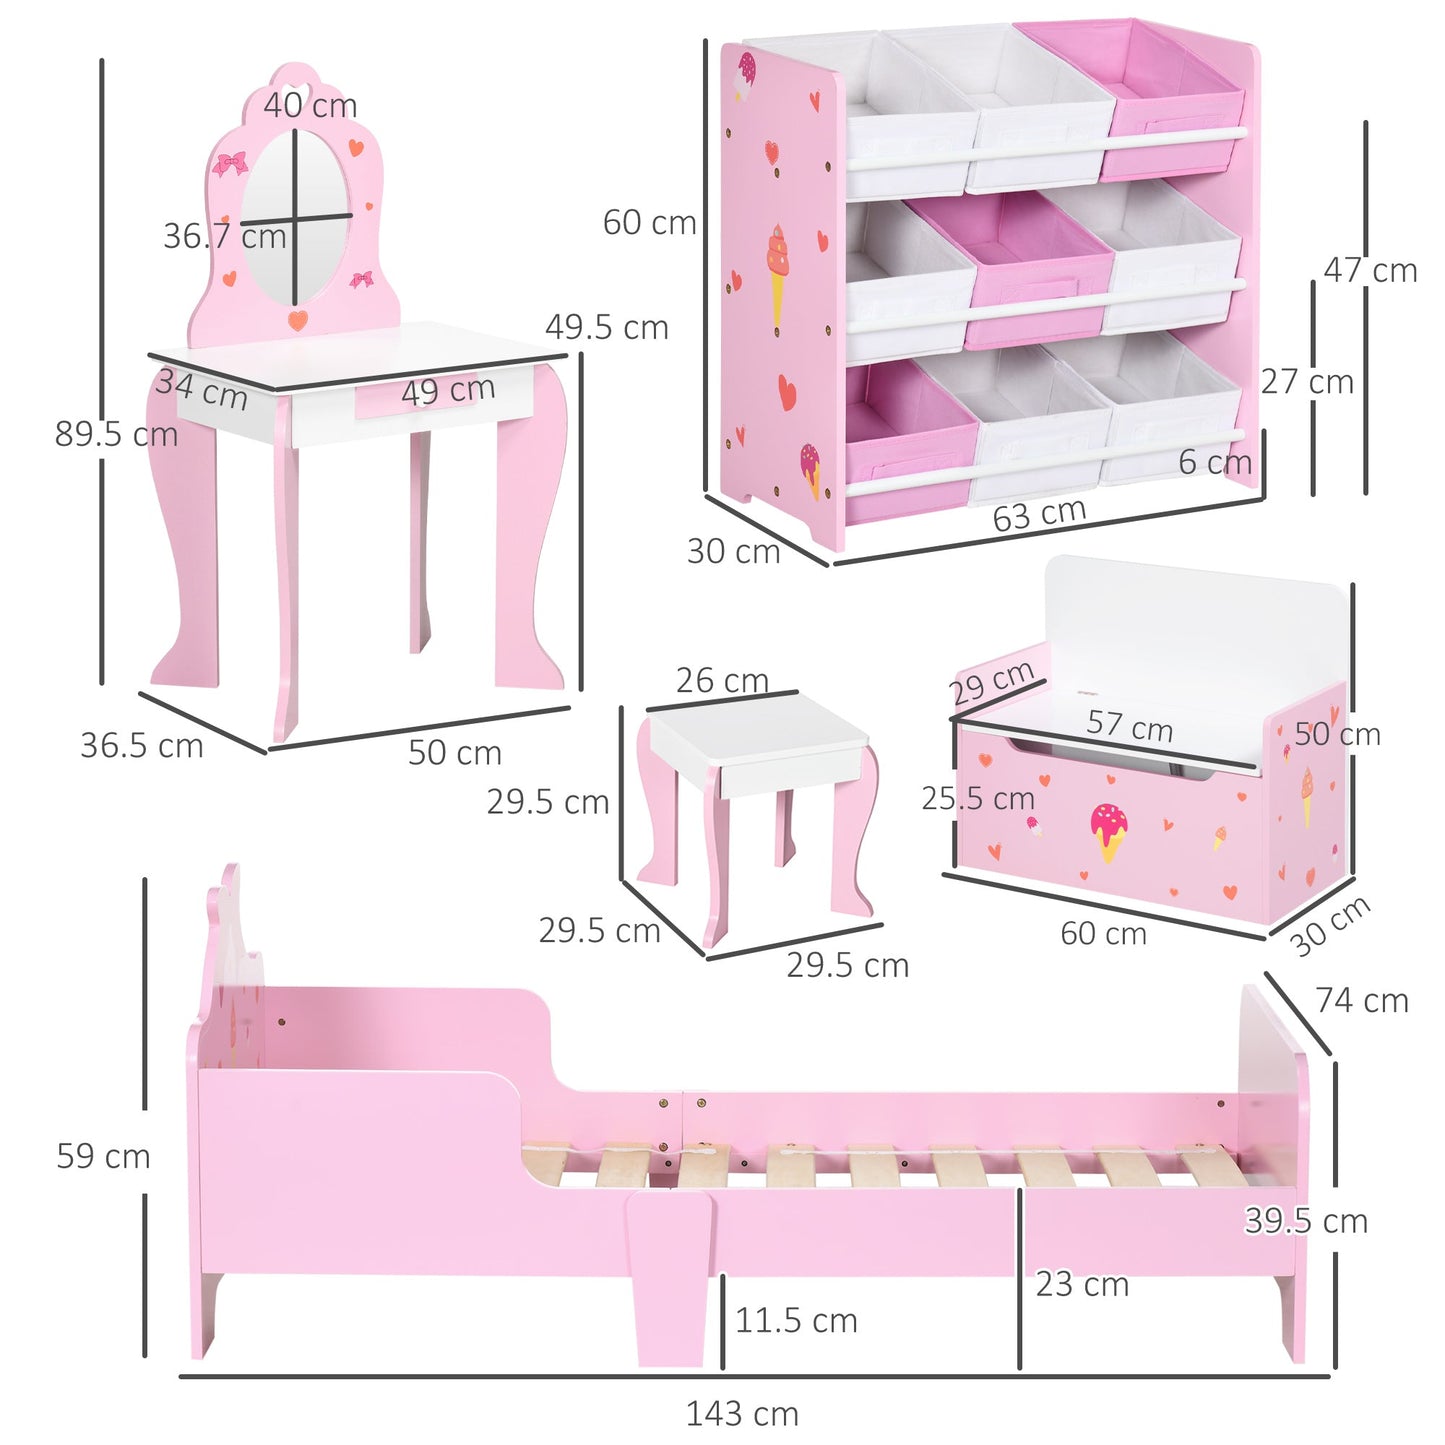 ZONEKIZ 5PCs Kids Bedroom Furniture Set with Bed, Toy Box Bench, Storage Unit, Dressing Table and Stool, Princess Themed, for 3-6 Years Old, Pink